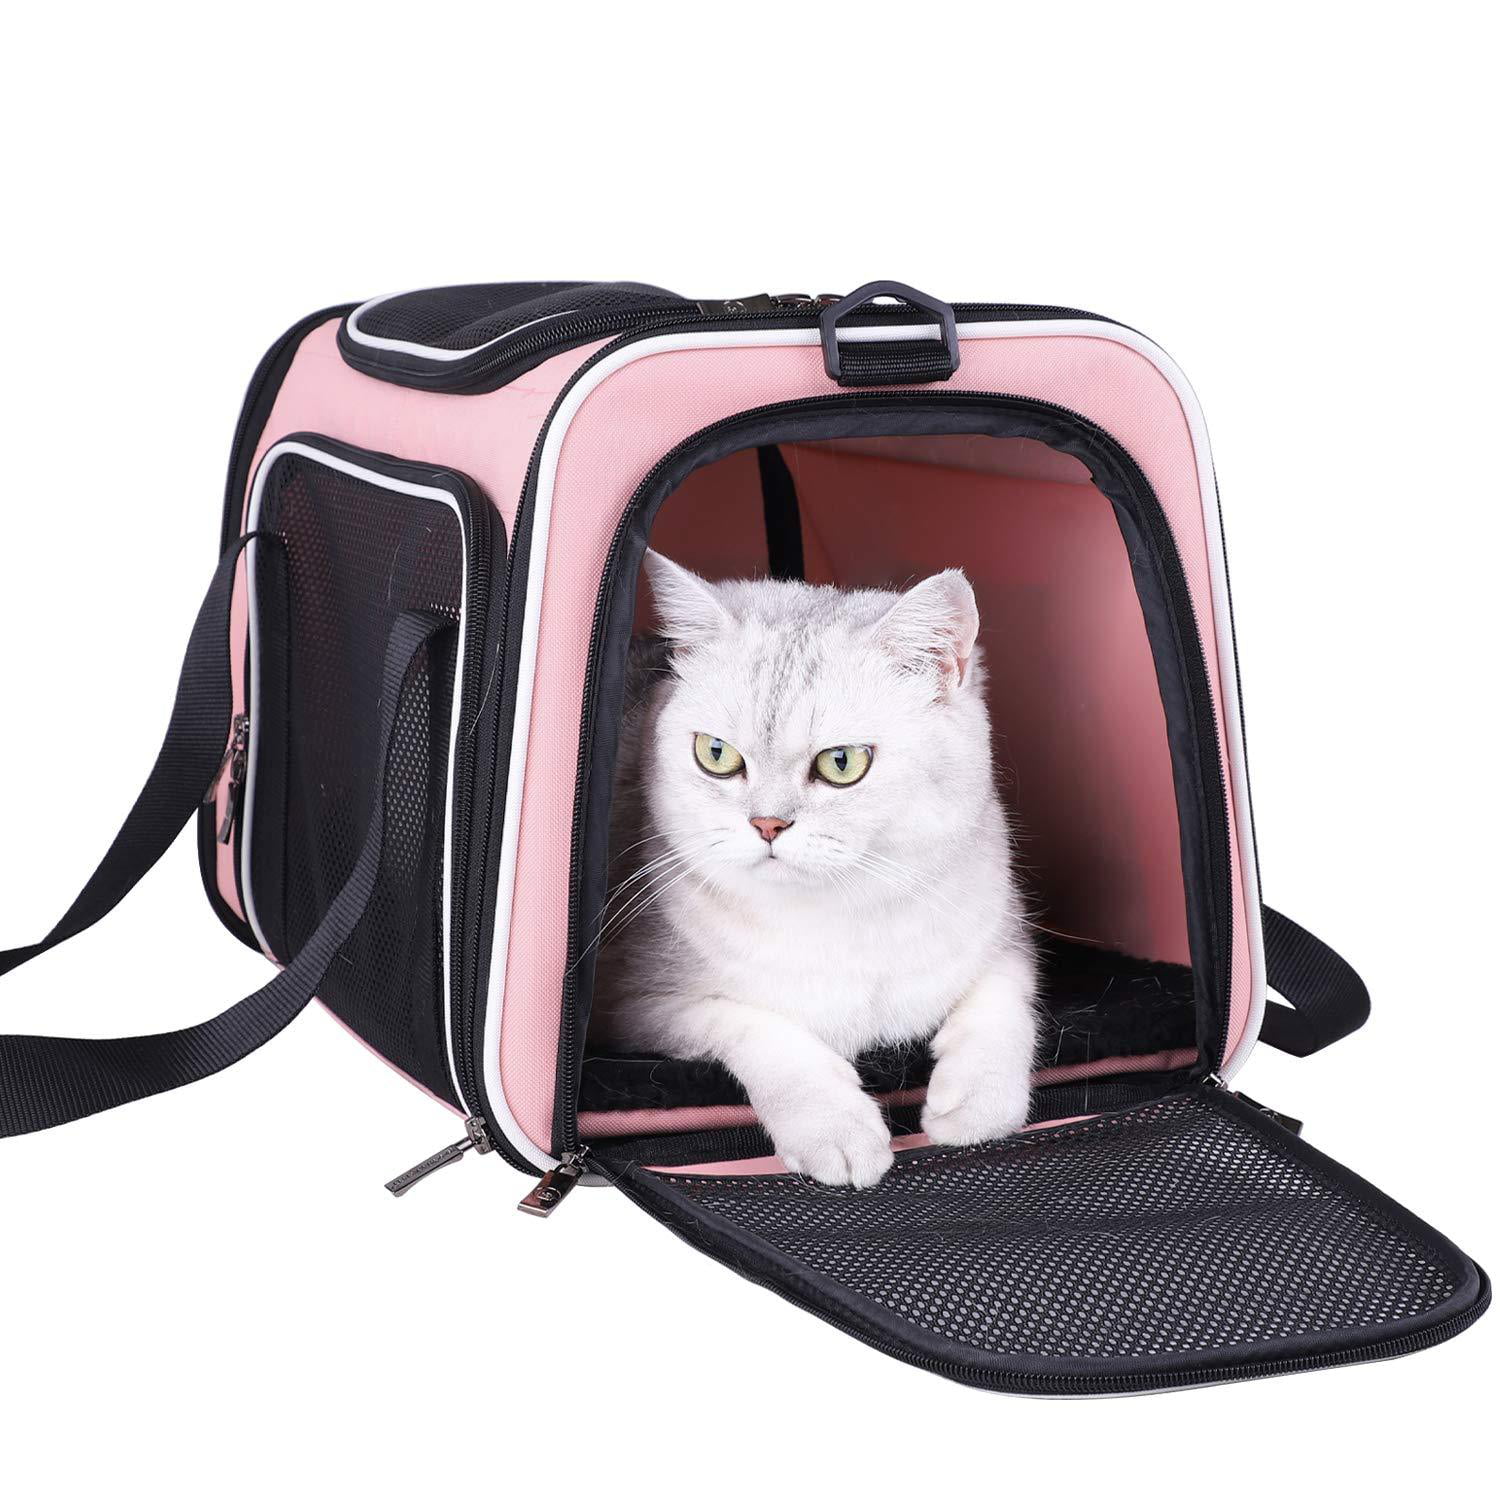 petsifam Pet Carrier for Large Cats and Small Dogs 